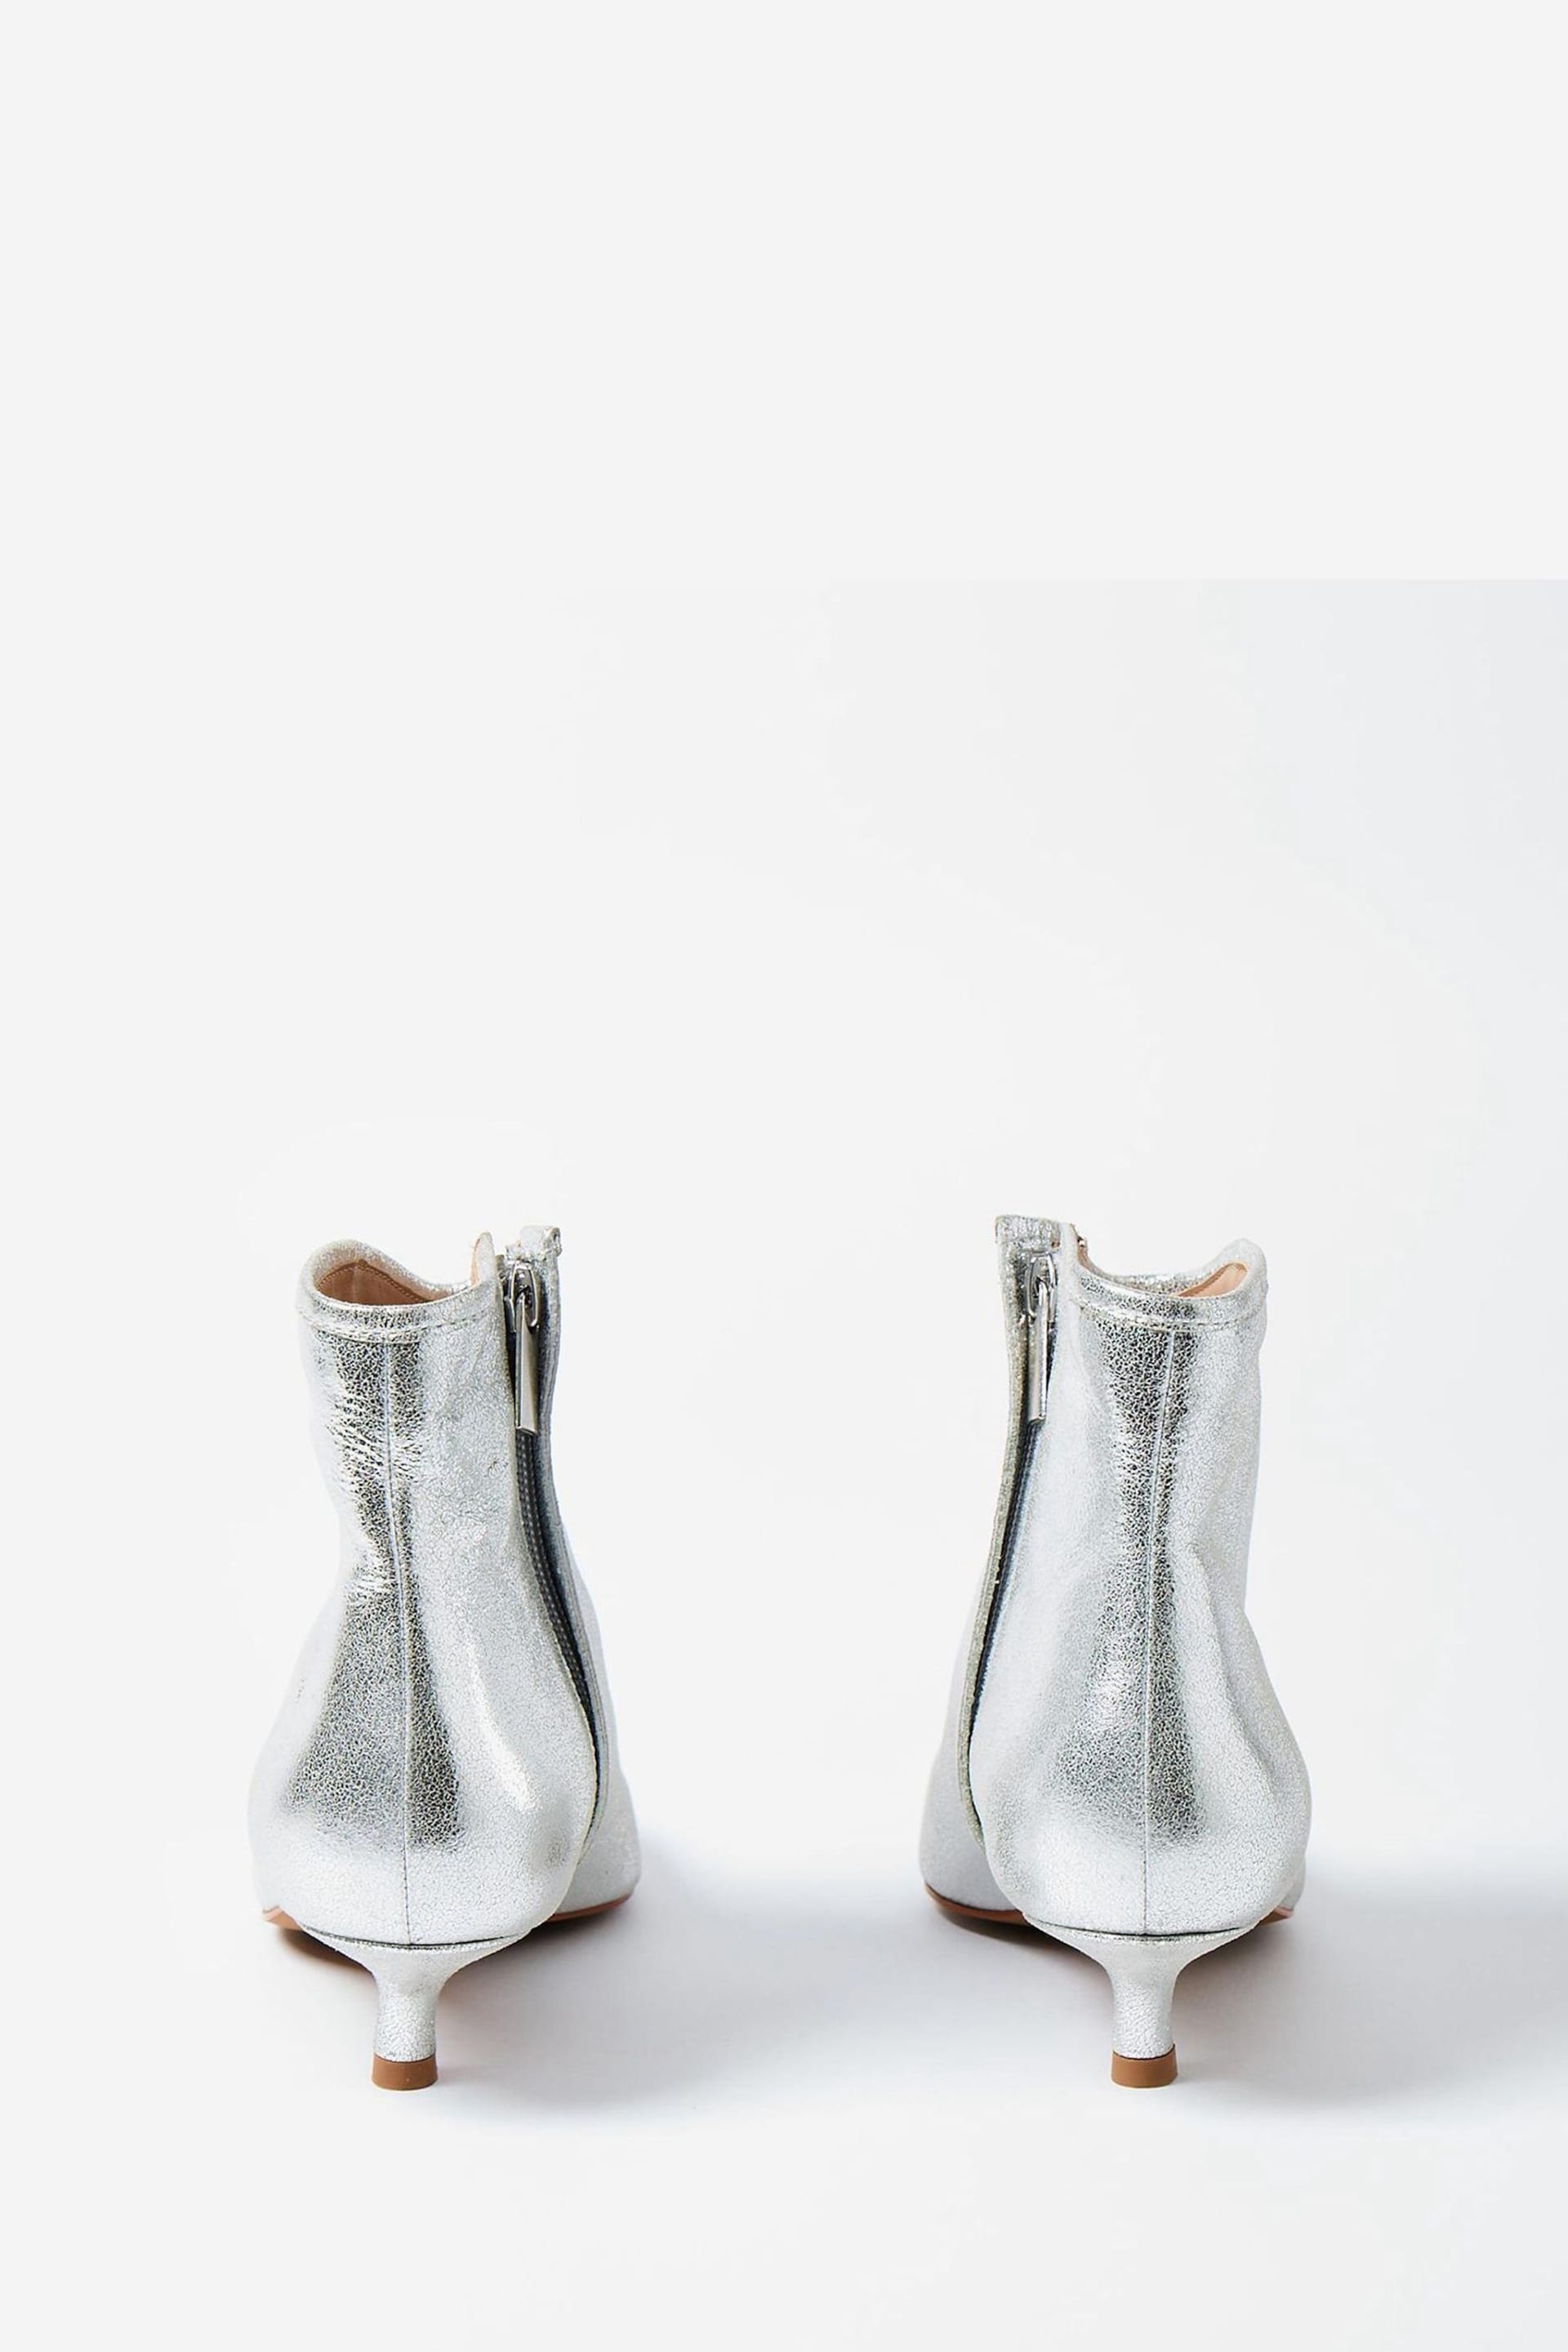 Oliver Bonas Silver Pointed Kitten Heel Leather Boots - Image 5 of 7